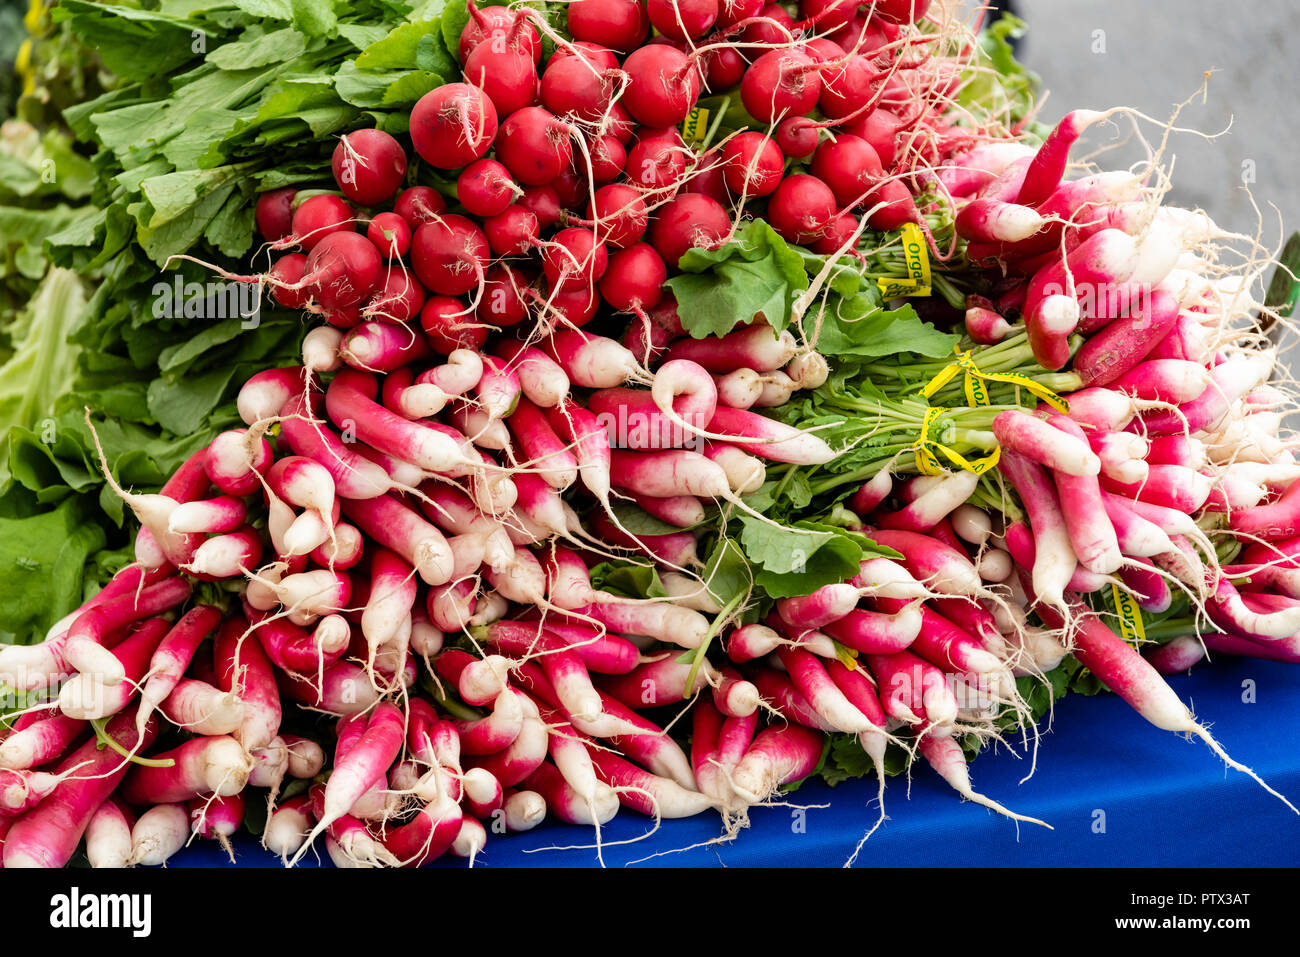 Radishes on display at the farmers market Stock Photo